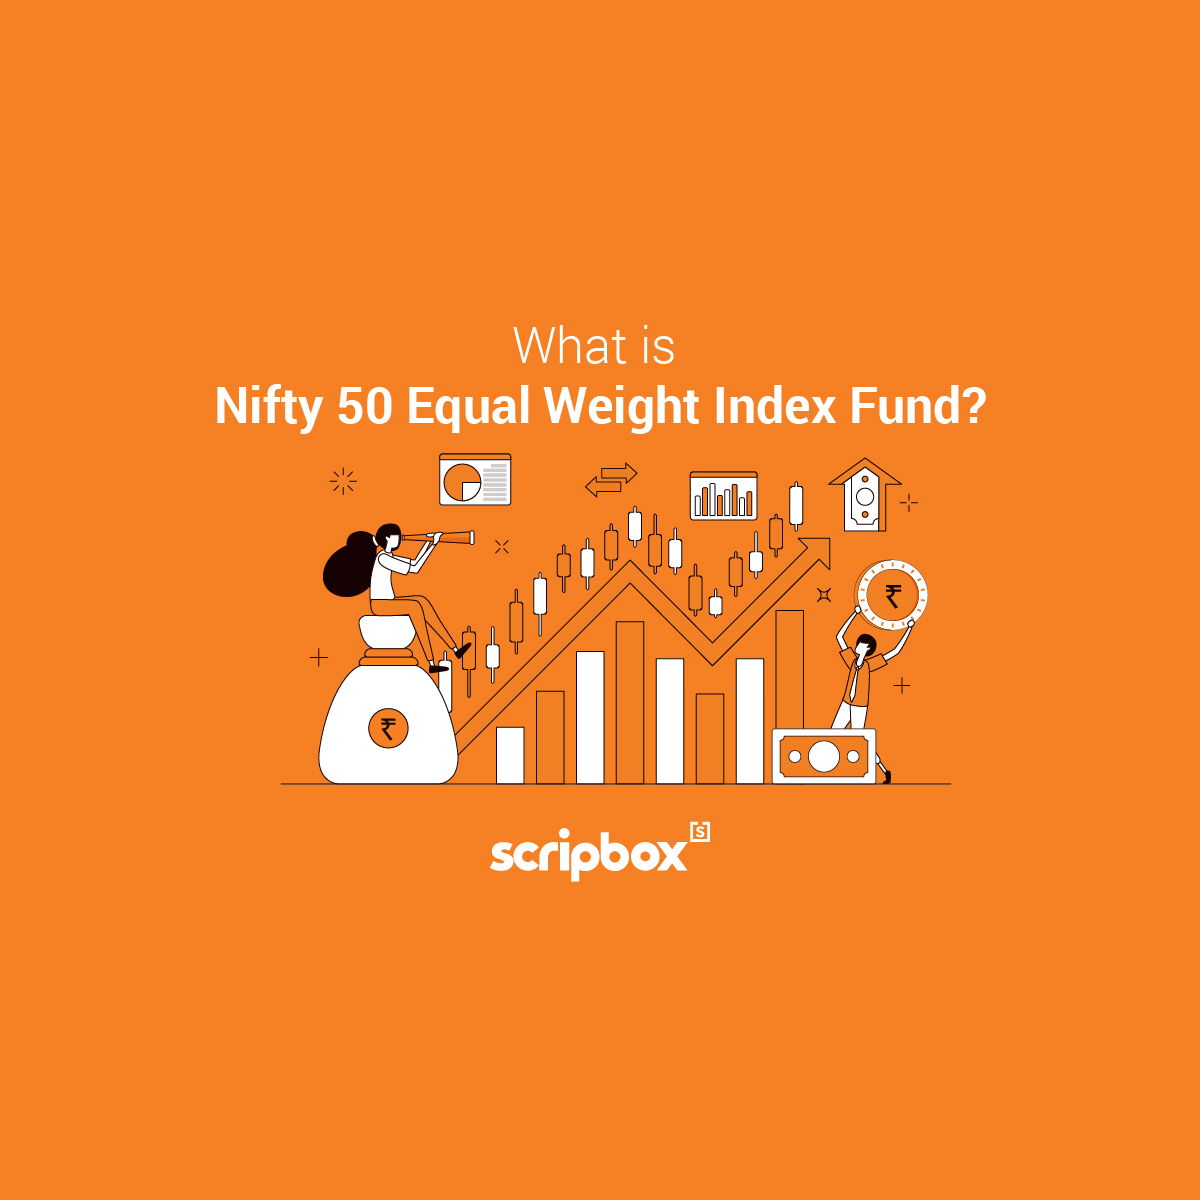 Nifty 50 Equal Weight Index